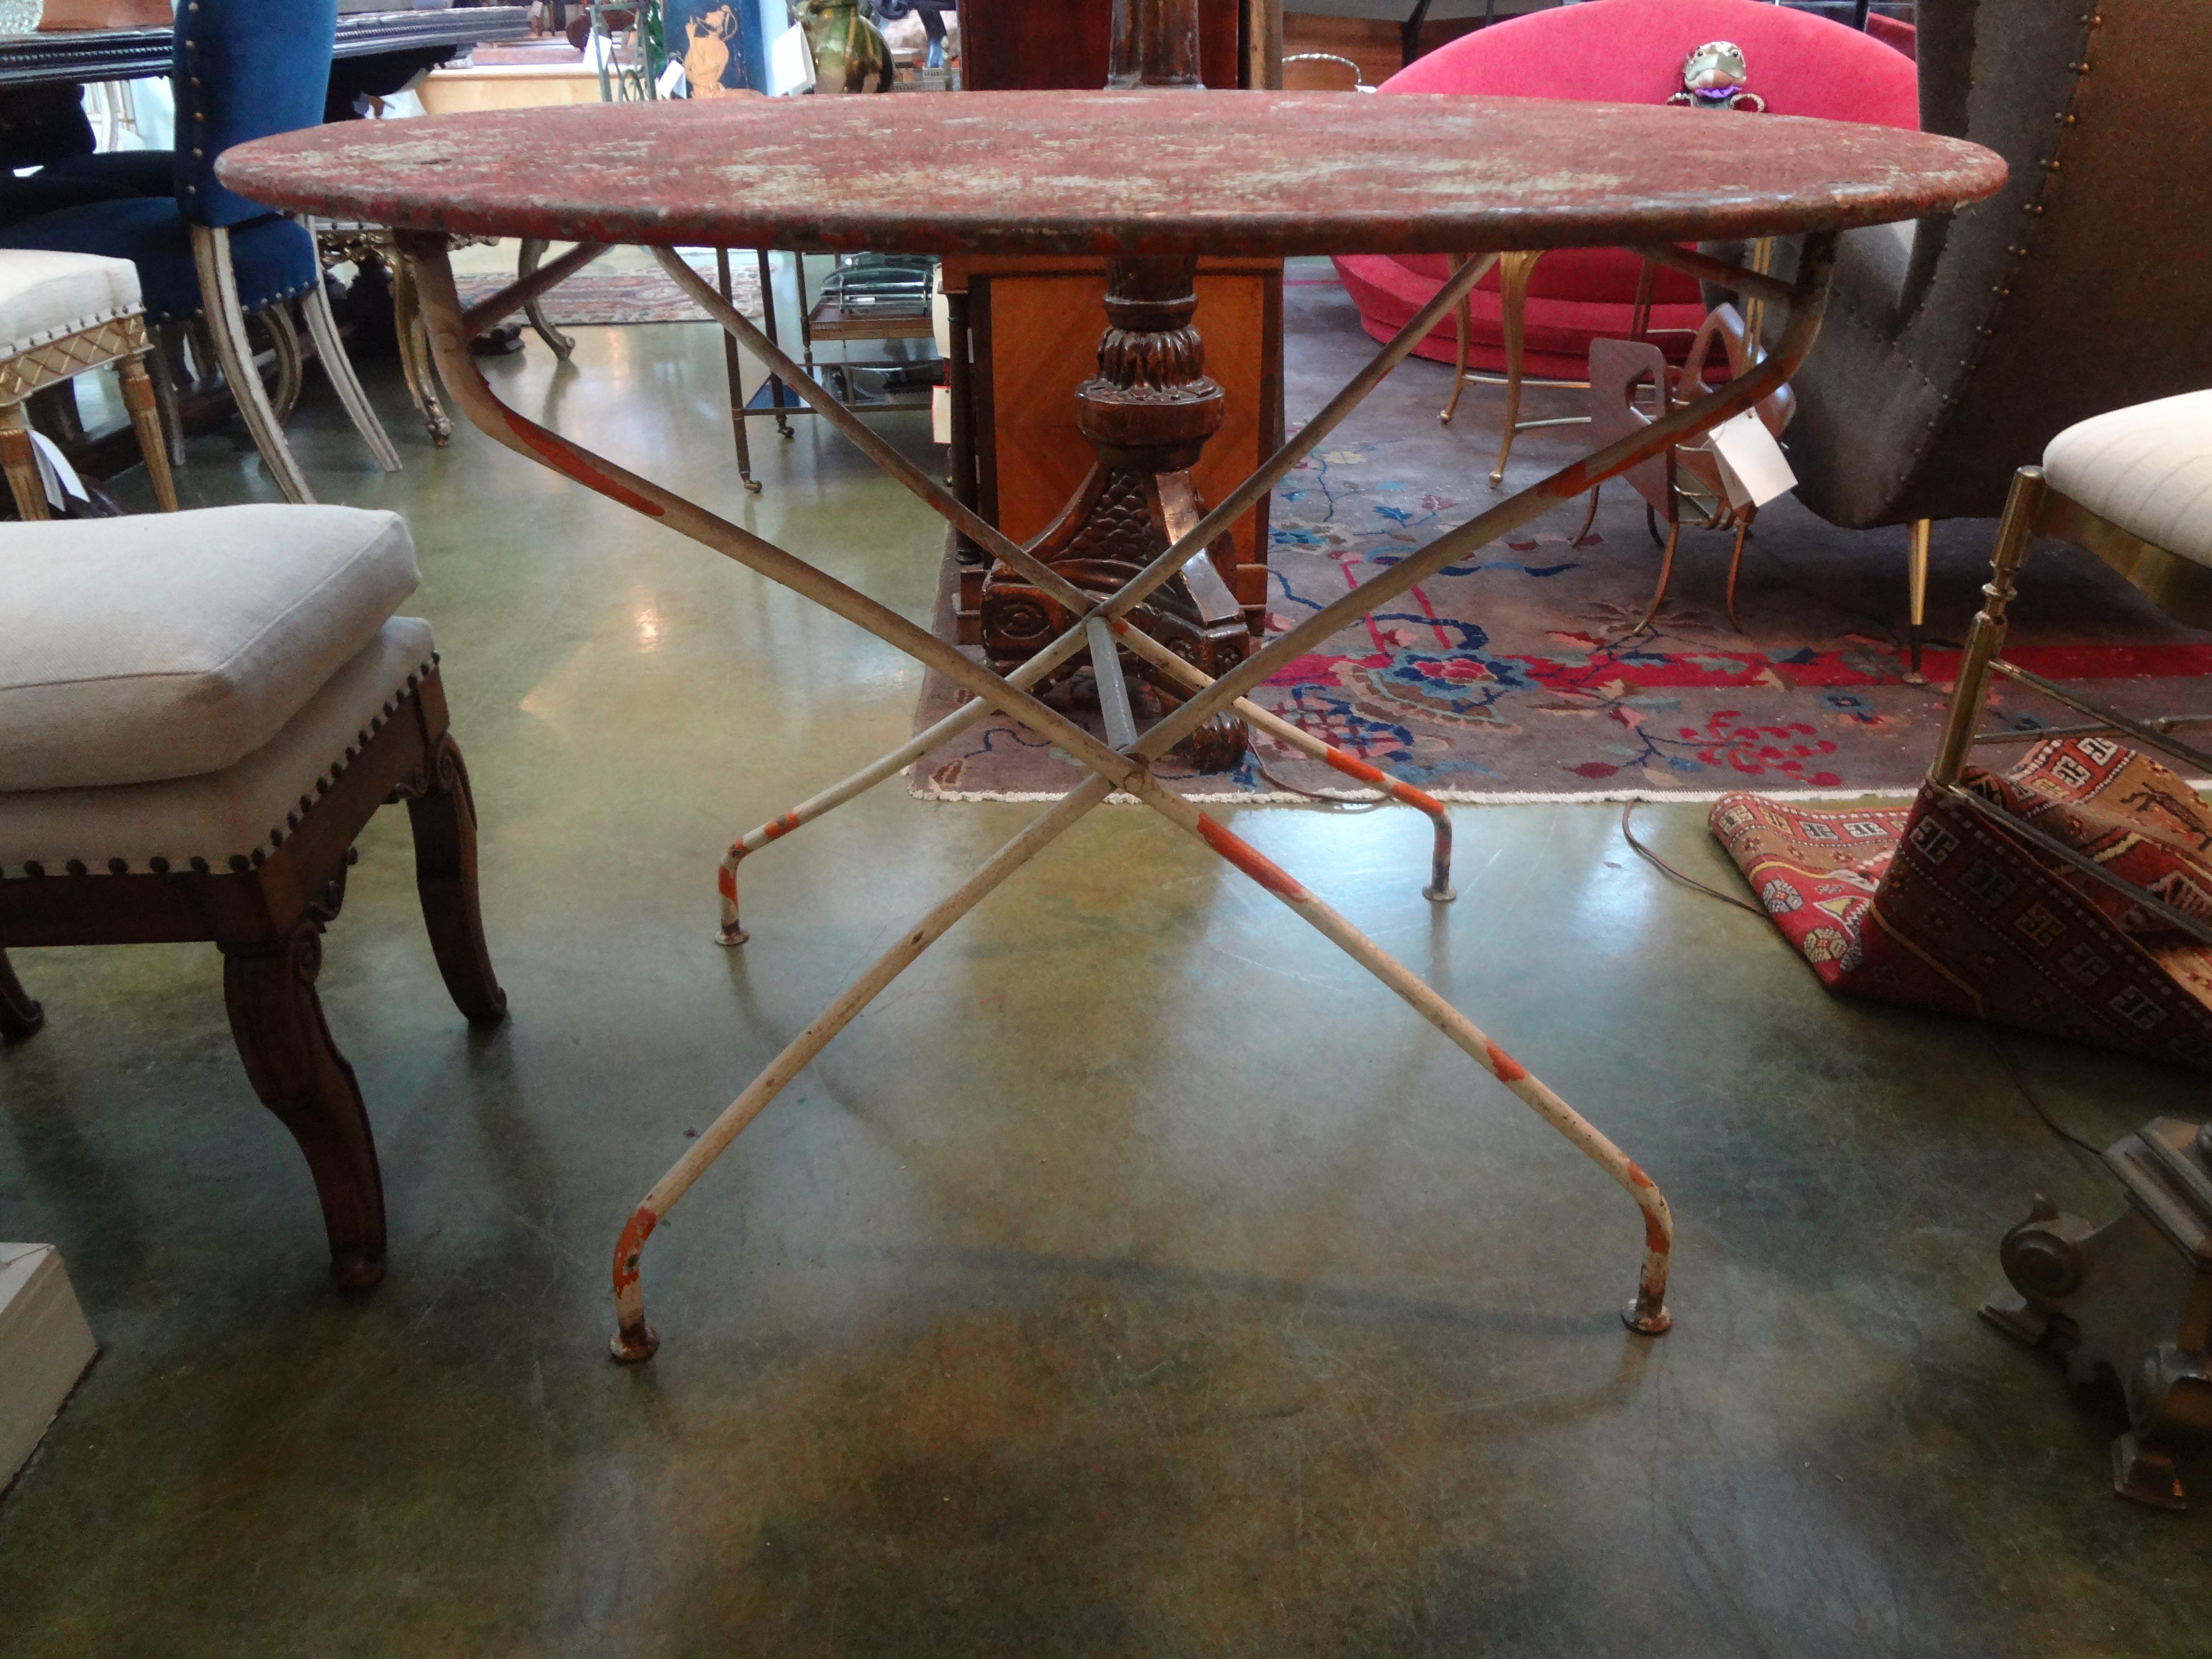 Gorgeous antique French folding iron garden table or bistro table with desirable chippy paint in soft orange-red and whites. This table would work well in an indoor garden room, family room or breakfast room.